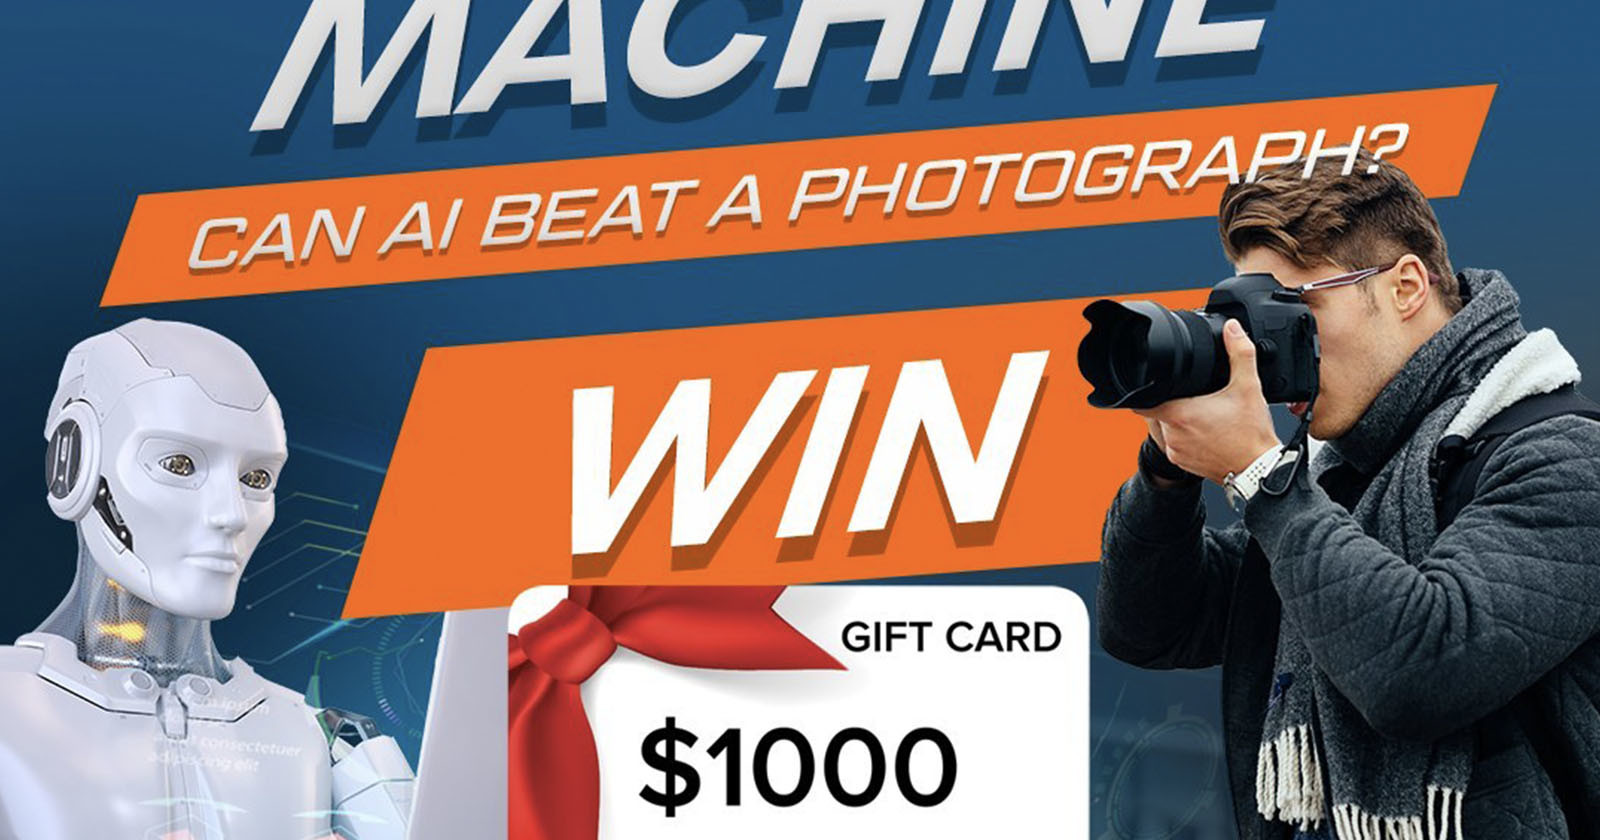 Photo Contest Fooled by AI Image Launches Human vs Machine Competition